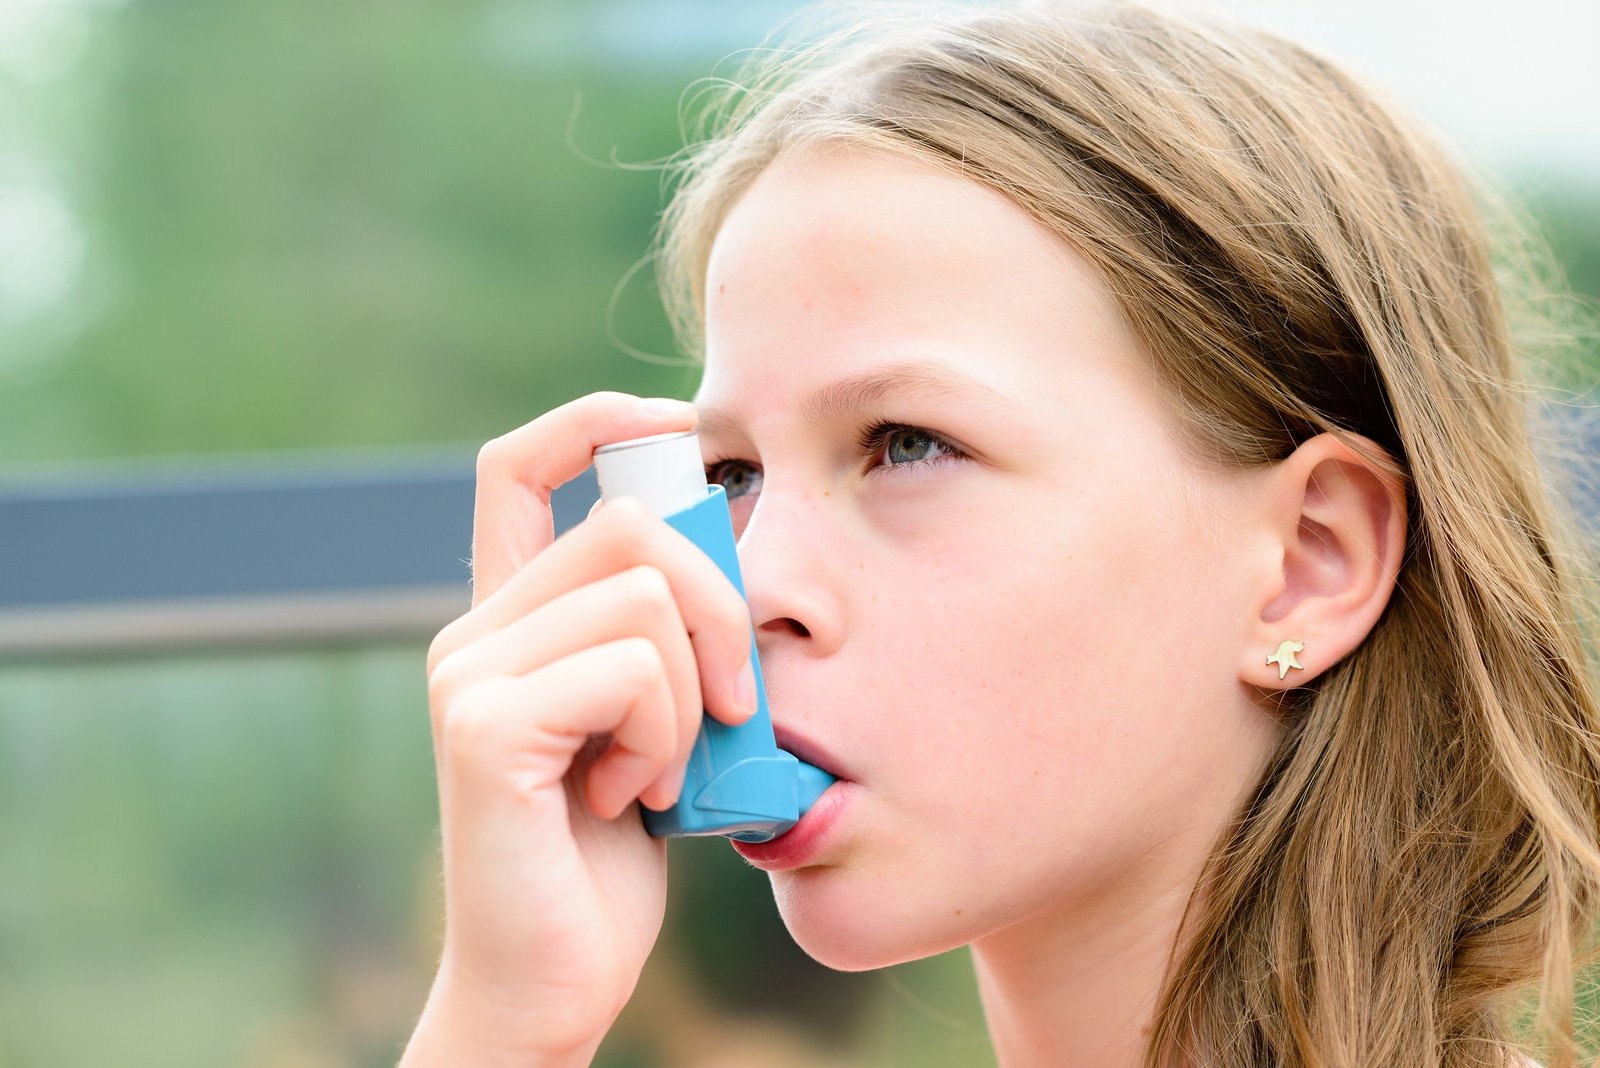 The 5 steps to follow during an asthma attack